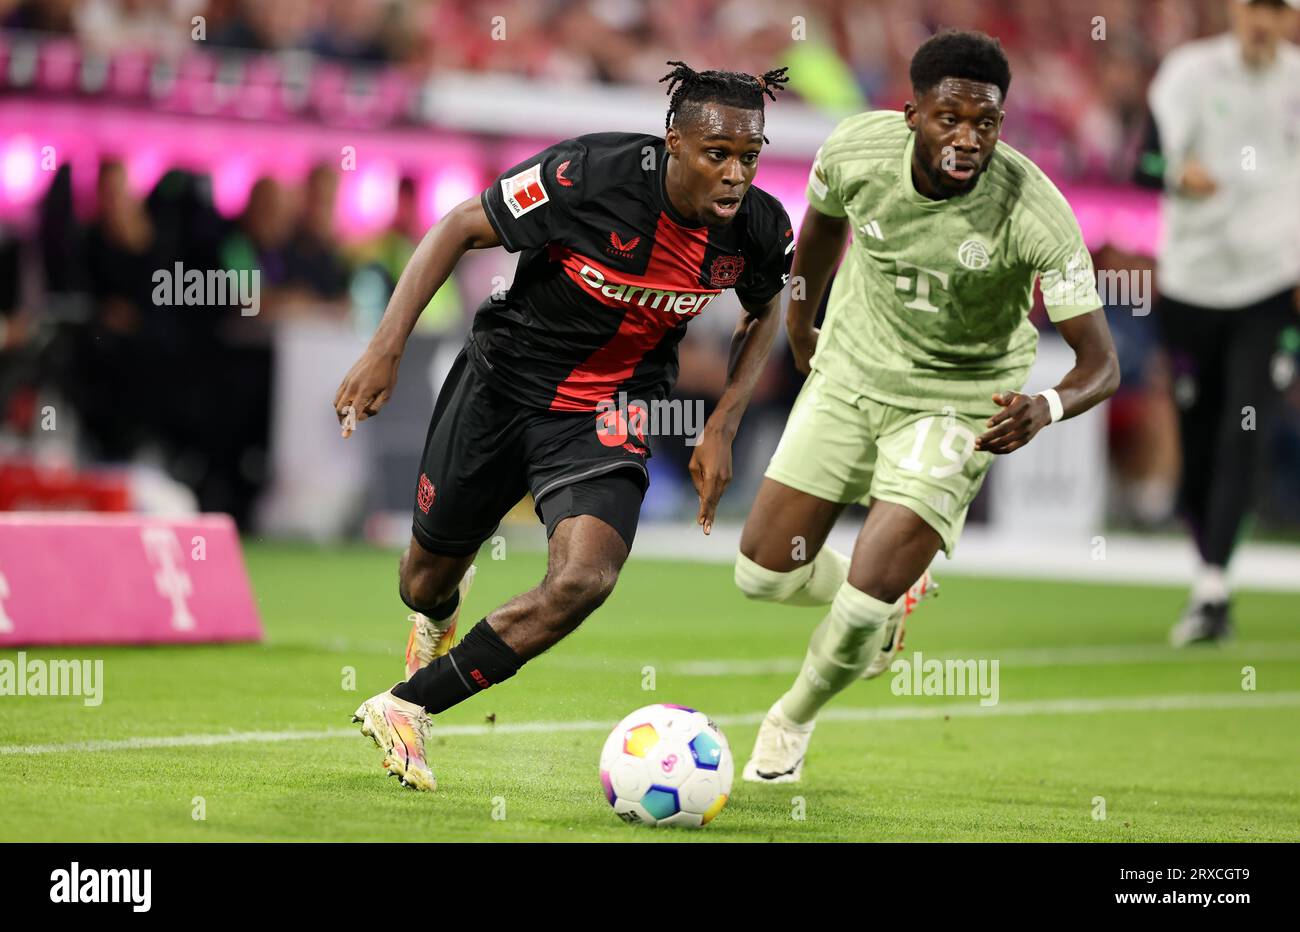 Jeremie FRIMPONG (Bayer 04 Leverkusen, #30) in a duel with Jakub KAMINSKI  (VfL Wolfsburg, #16), Stock Photo, Picture And Rights Managed Image. Pic.  PAH-321123917